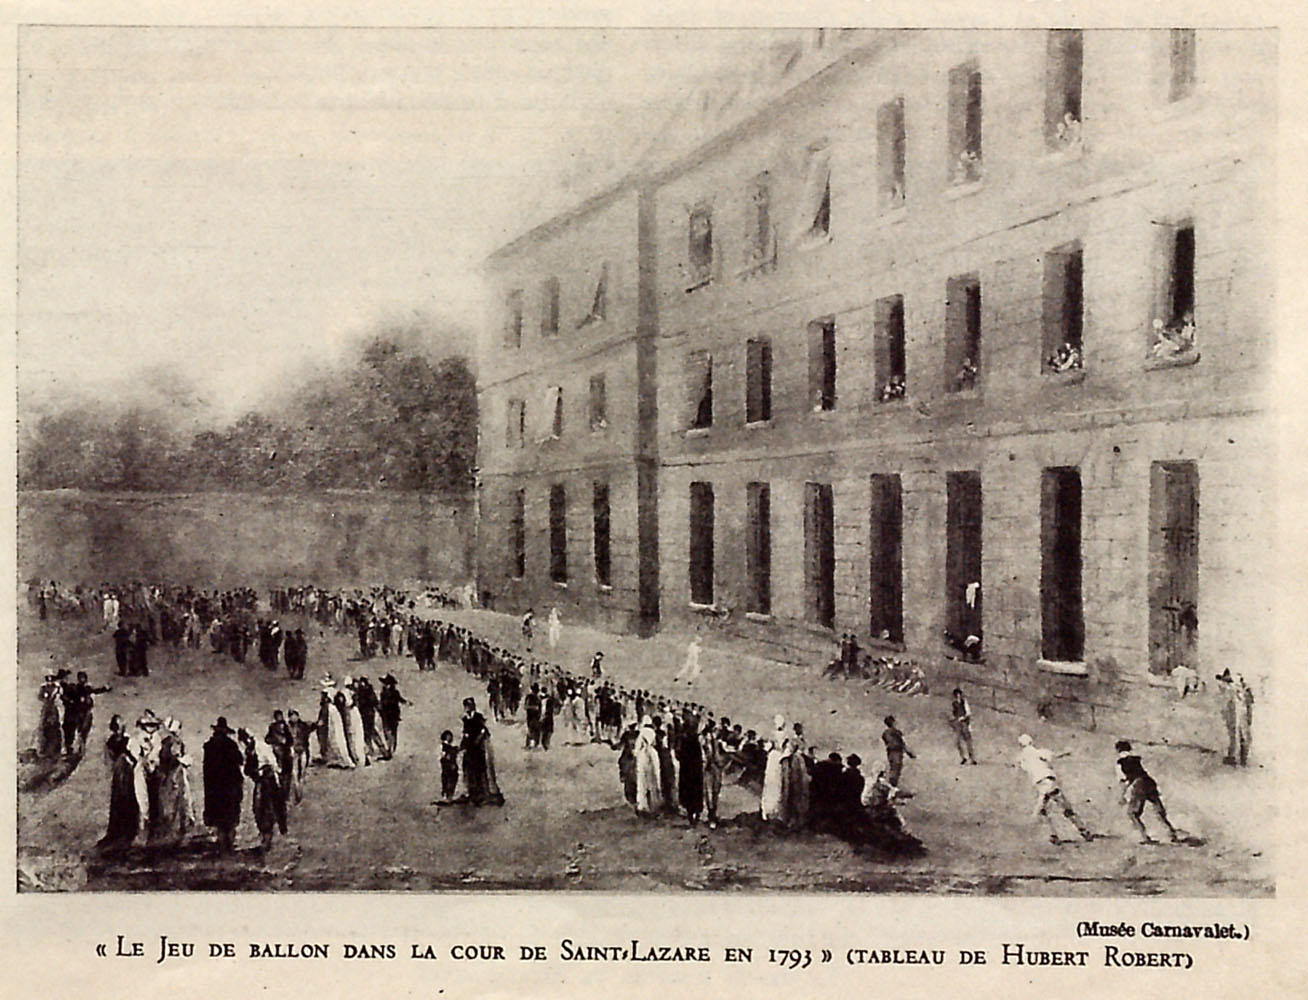 A Baloon game in the courtyard of Saint-Lazare in 1793